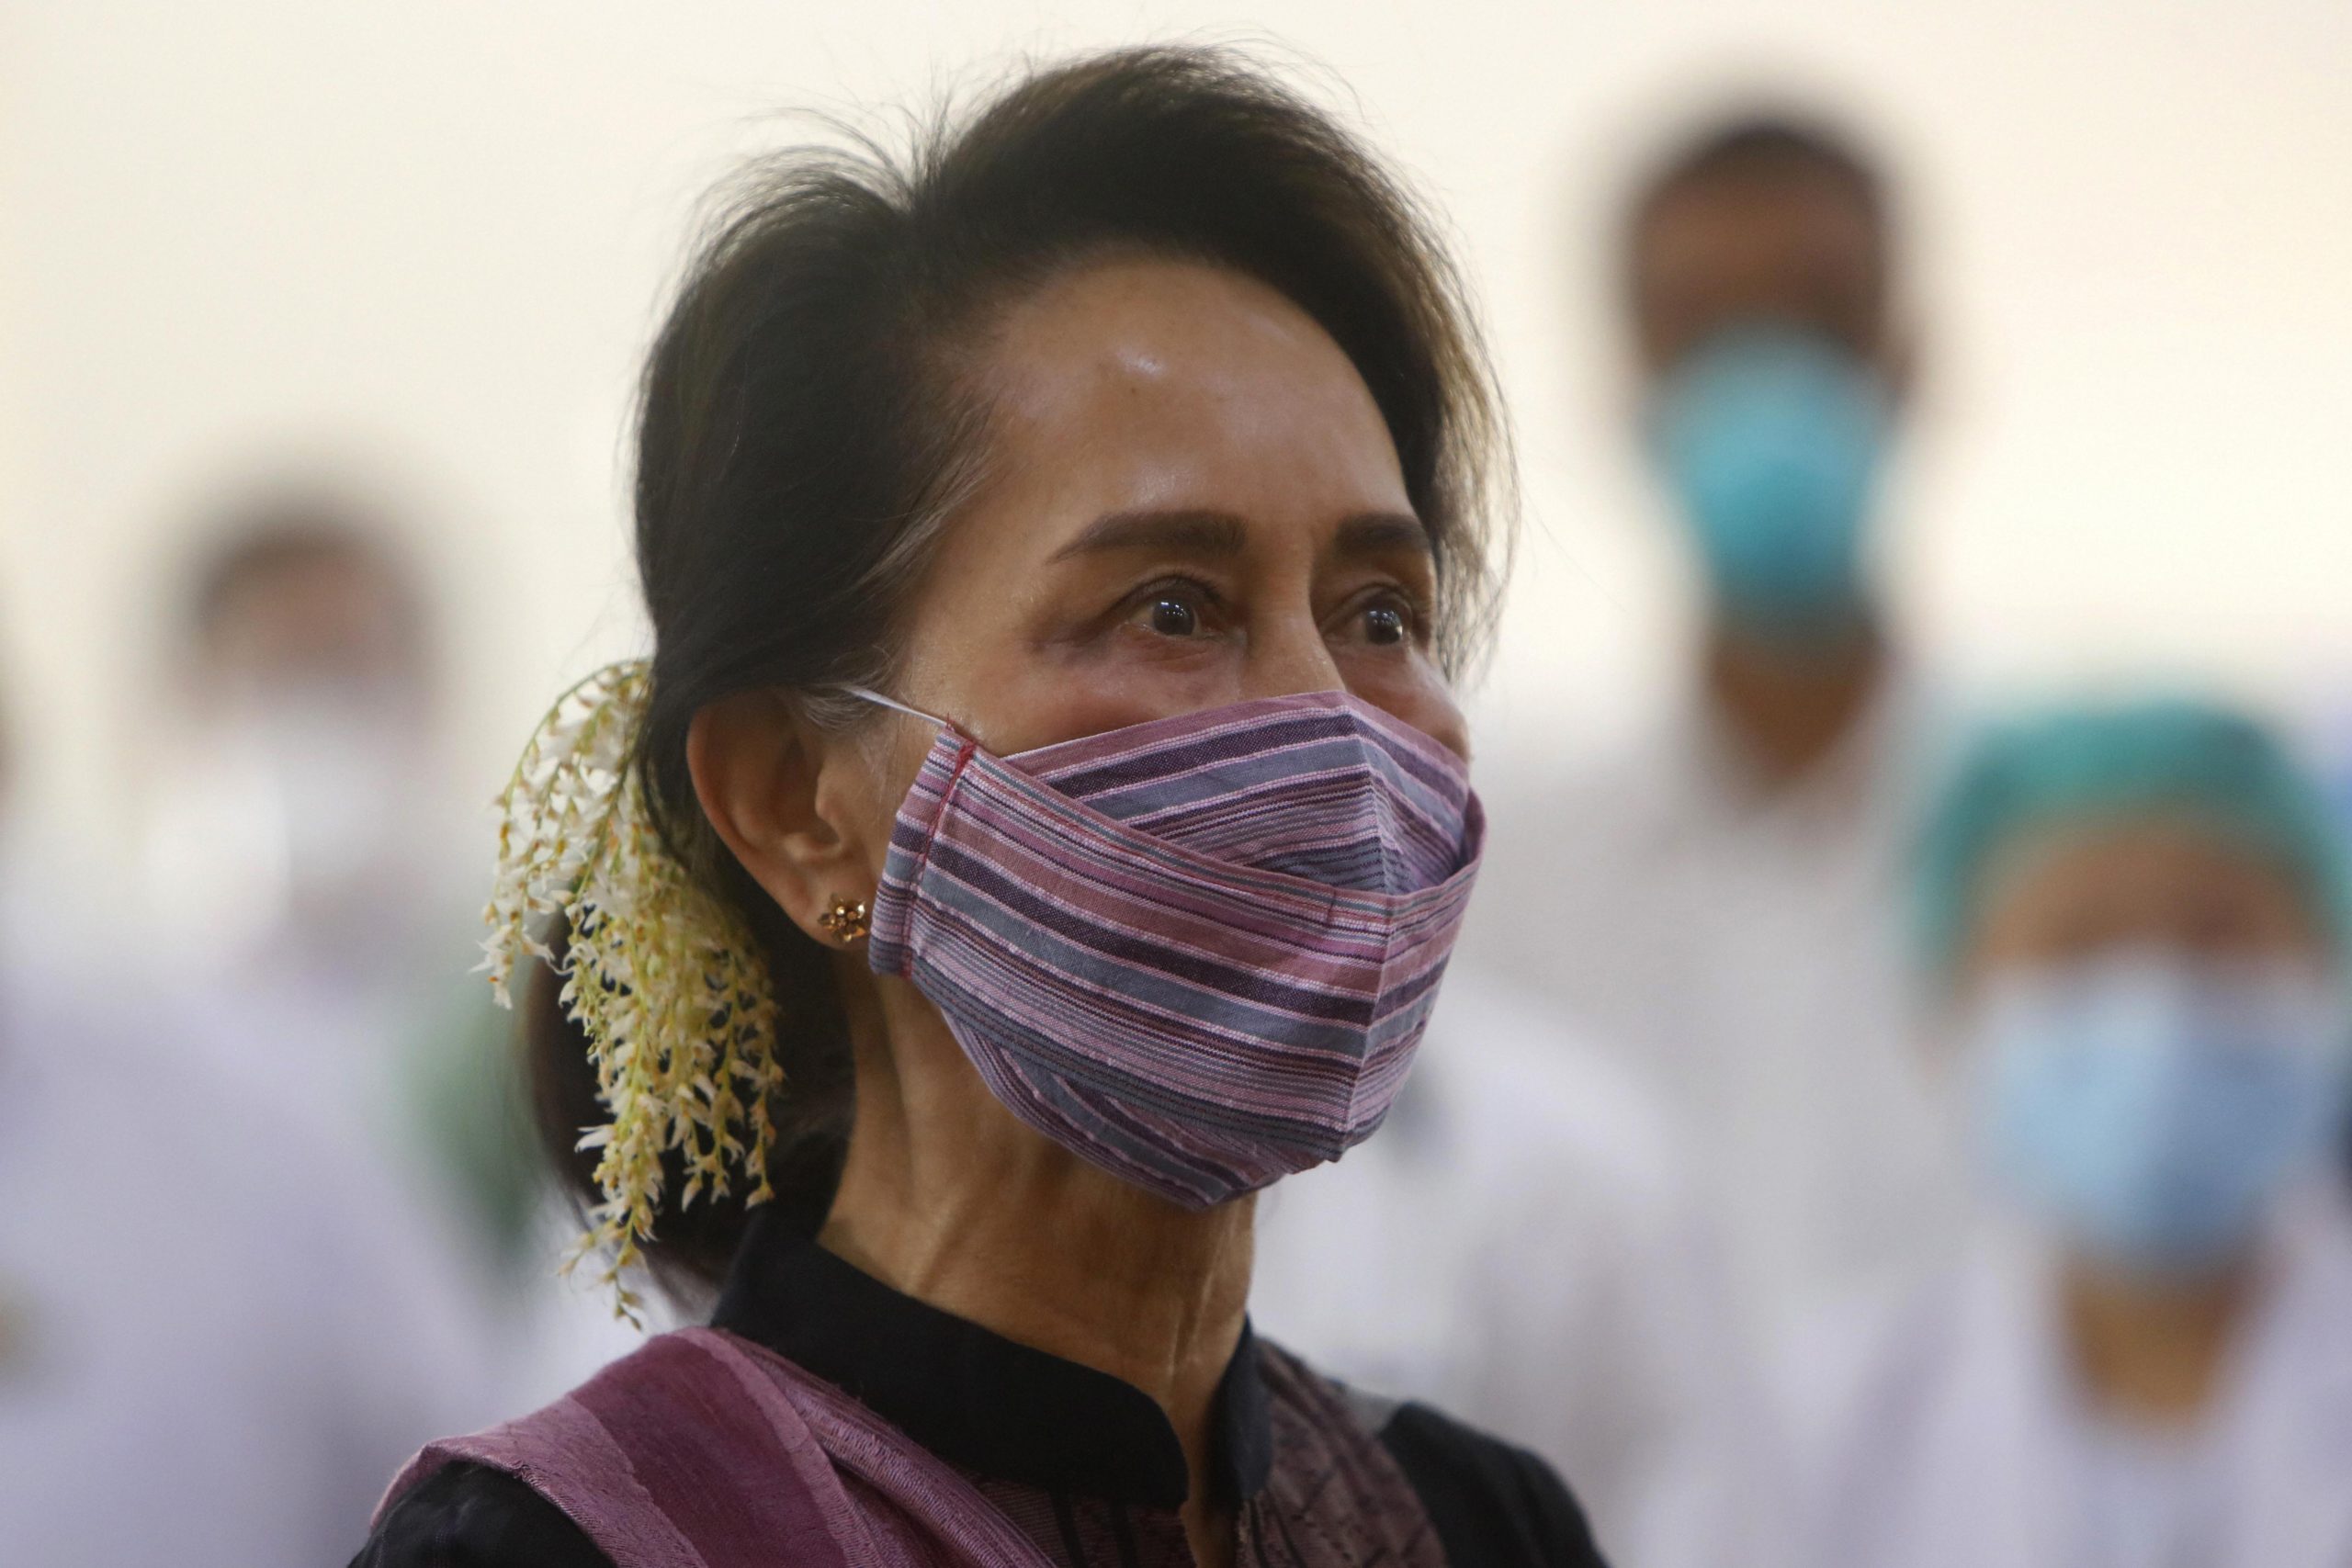 Myanmar: Military junta charges Aung San Suu Kyi with election fraud